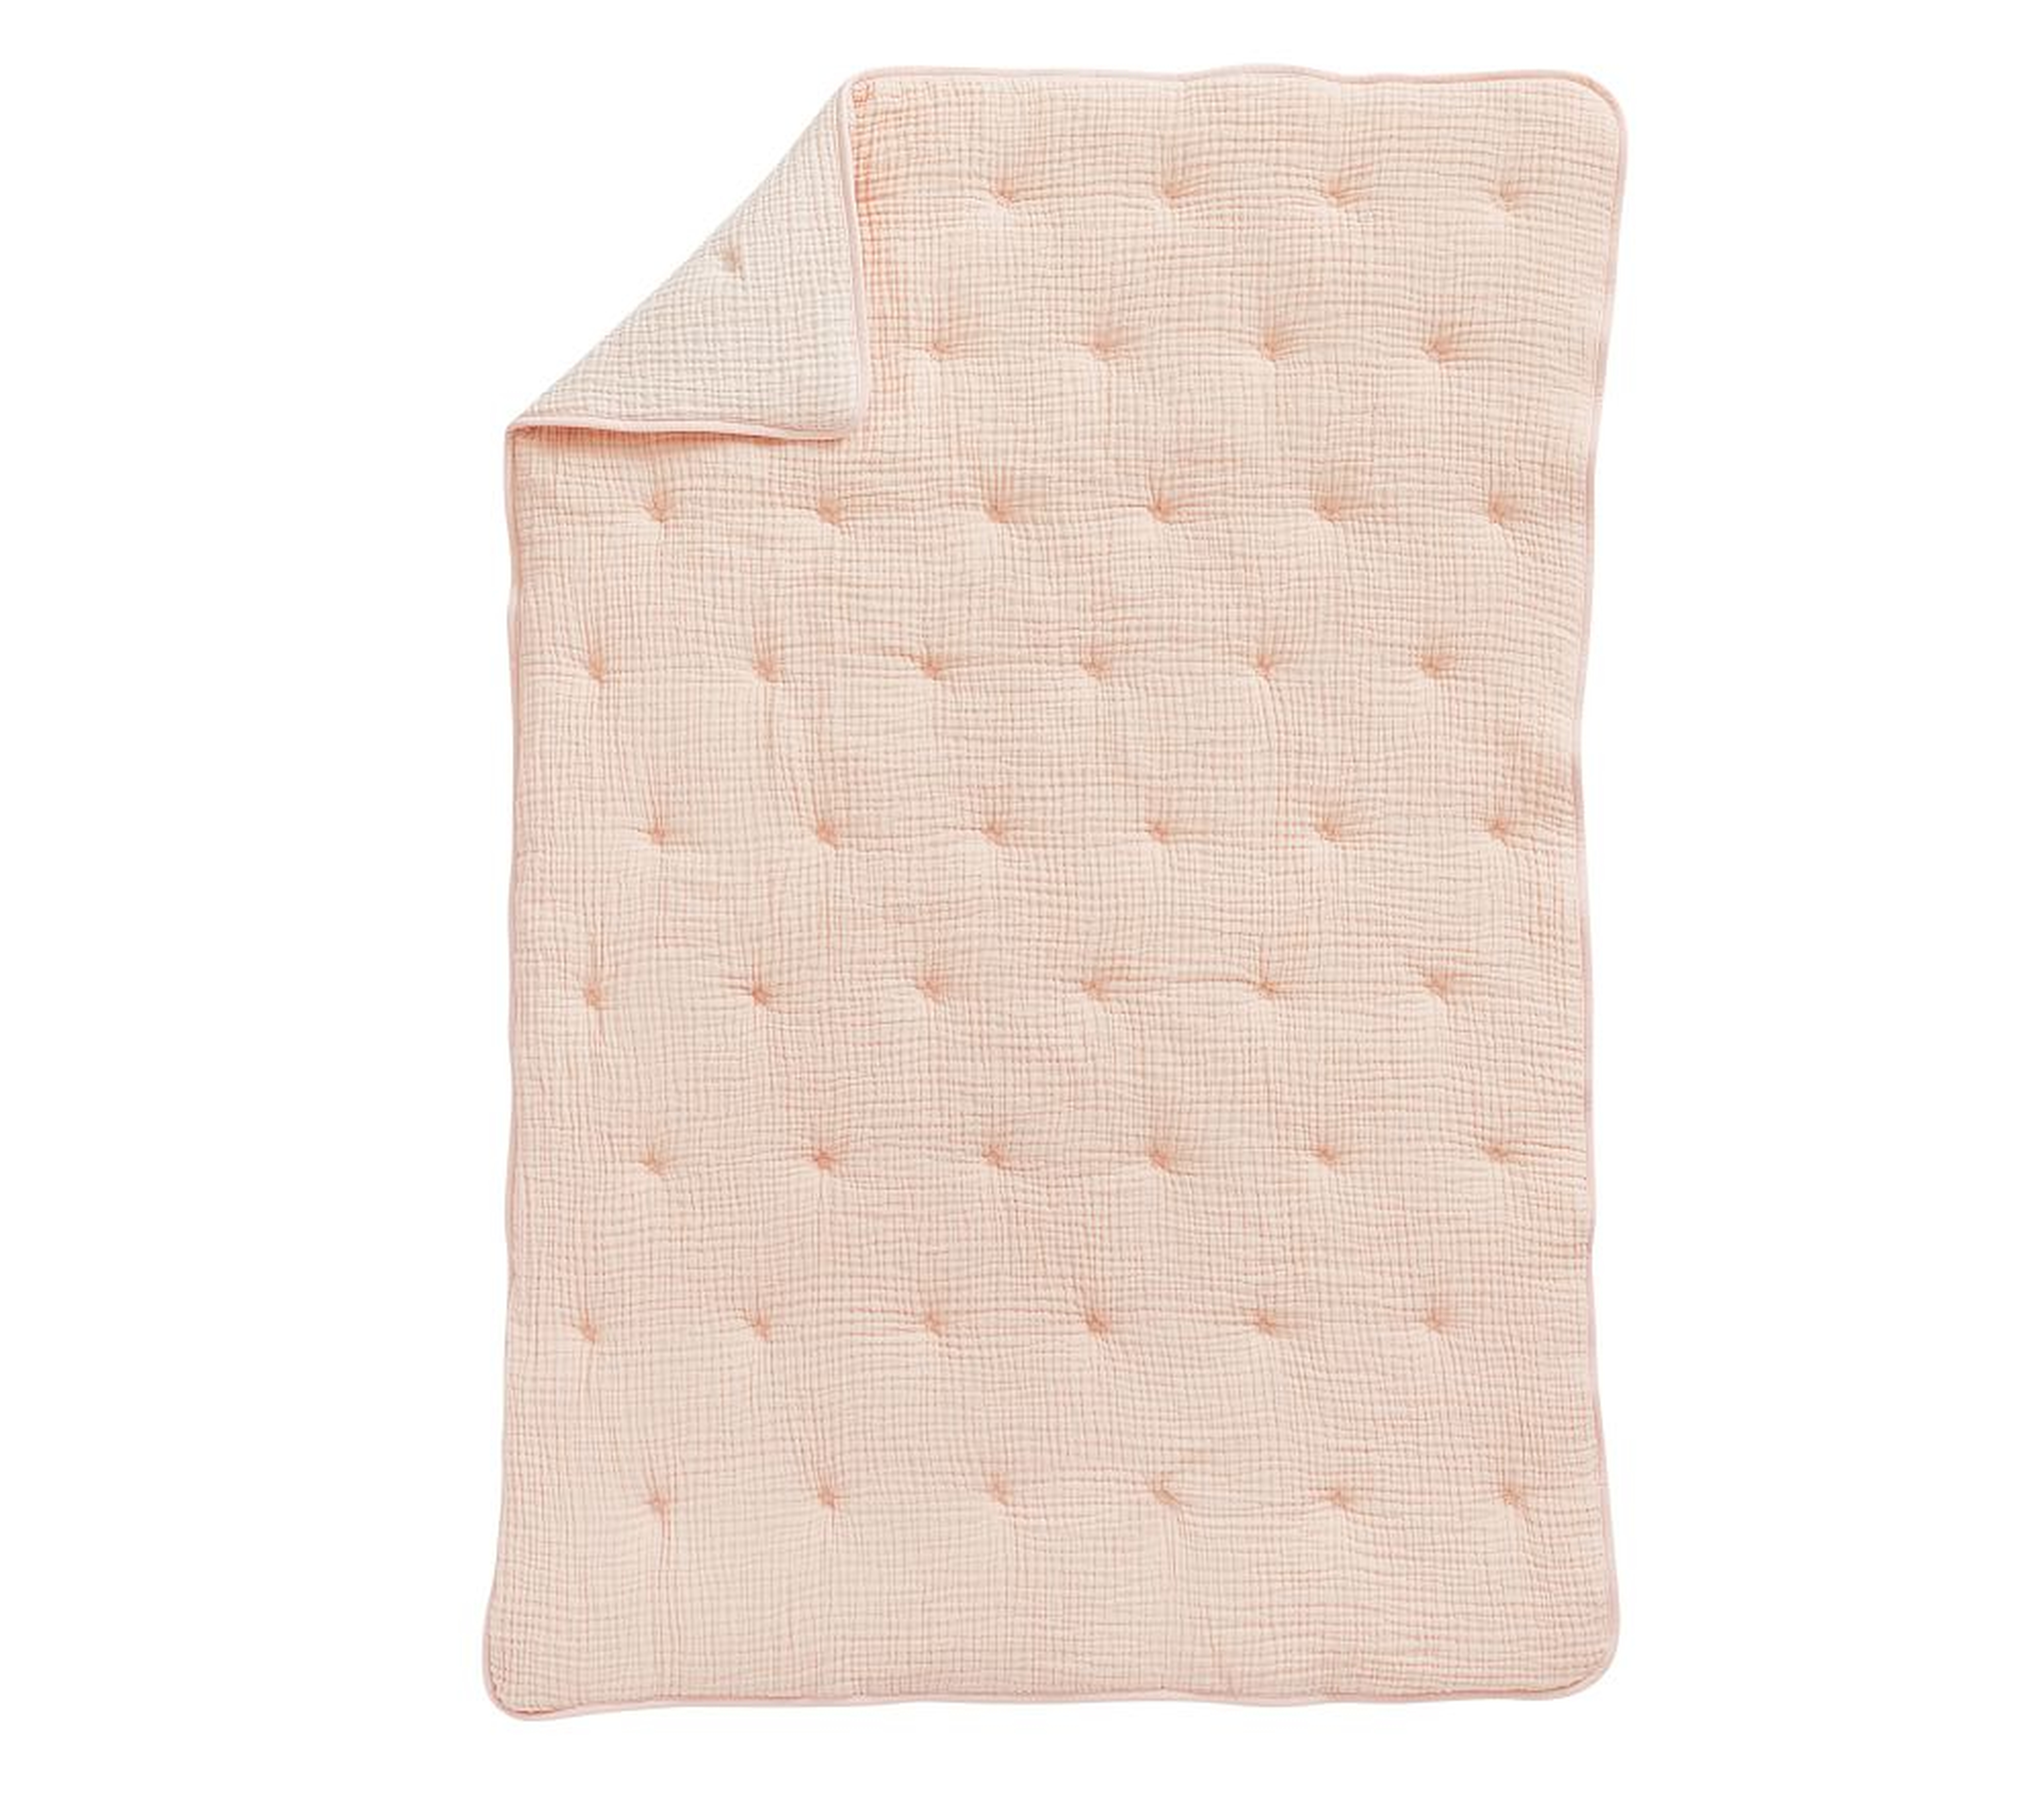 Cuddle Me Muslin Baby Quilt, Blush - Pottery Barn Kids